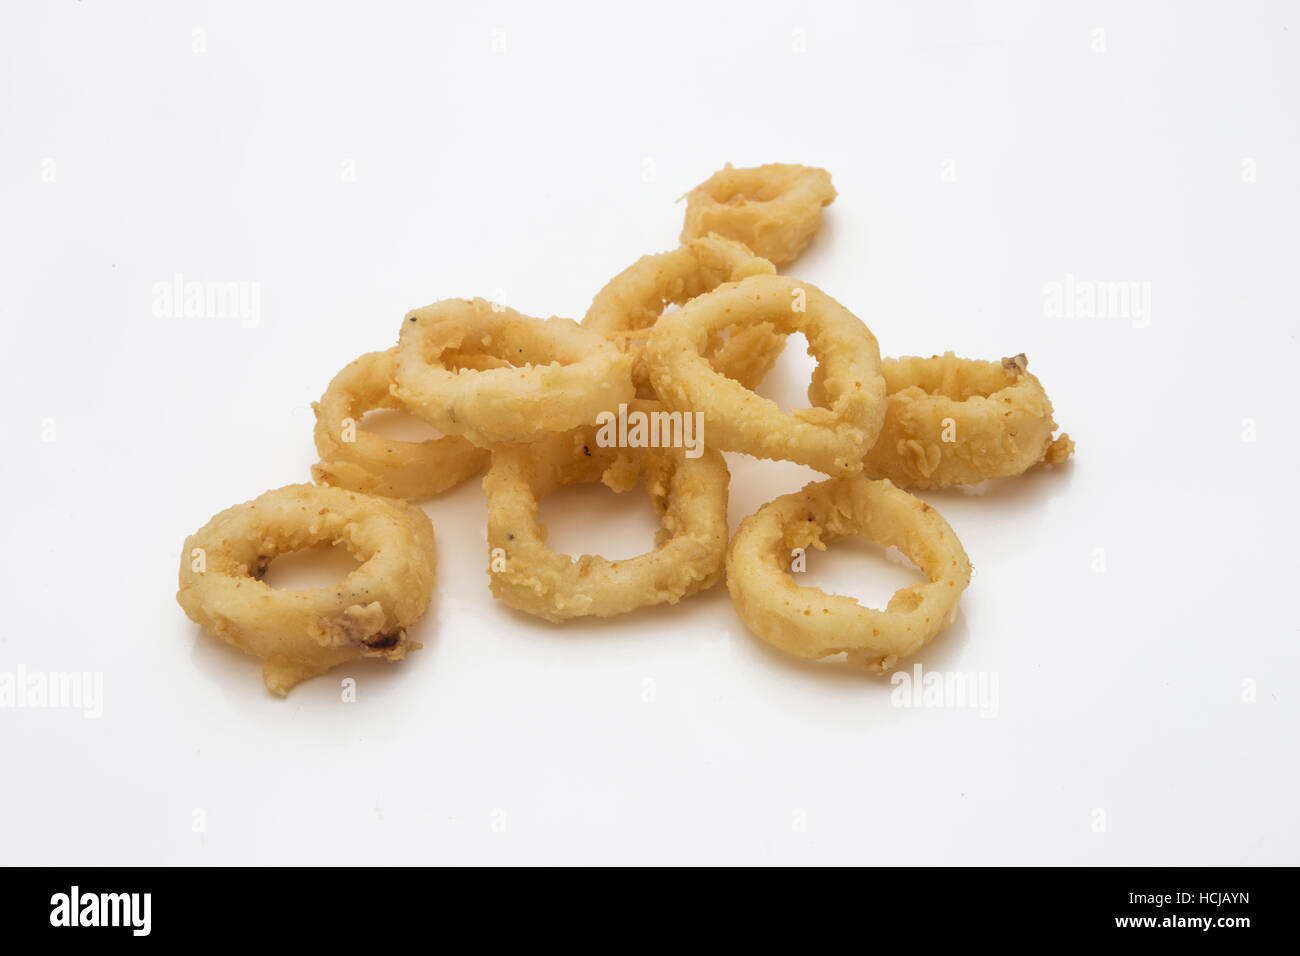 Calamari ring OR Fried squid ring with lemon and sauce - Italian food style isolated on white Stock Photo